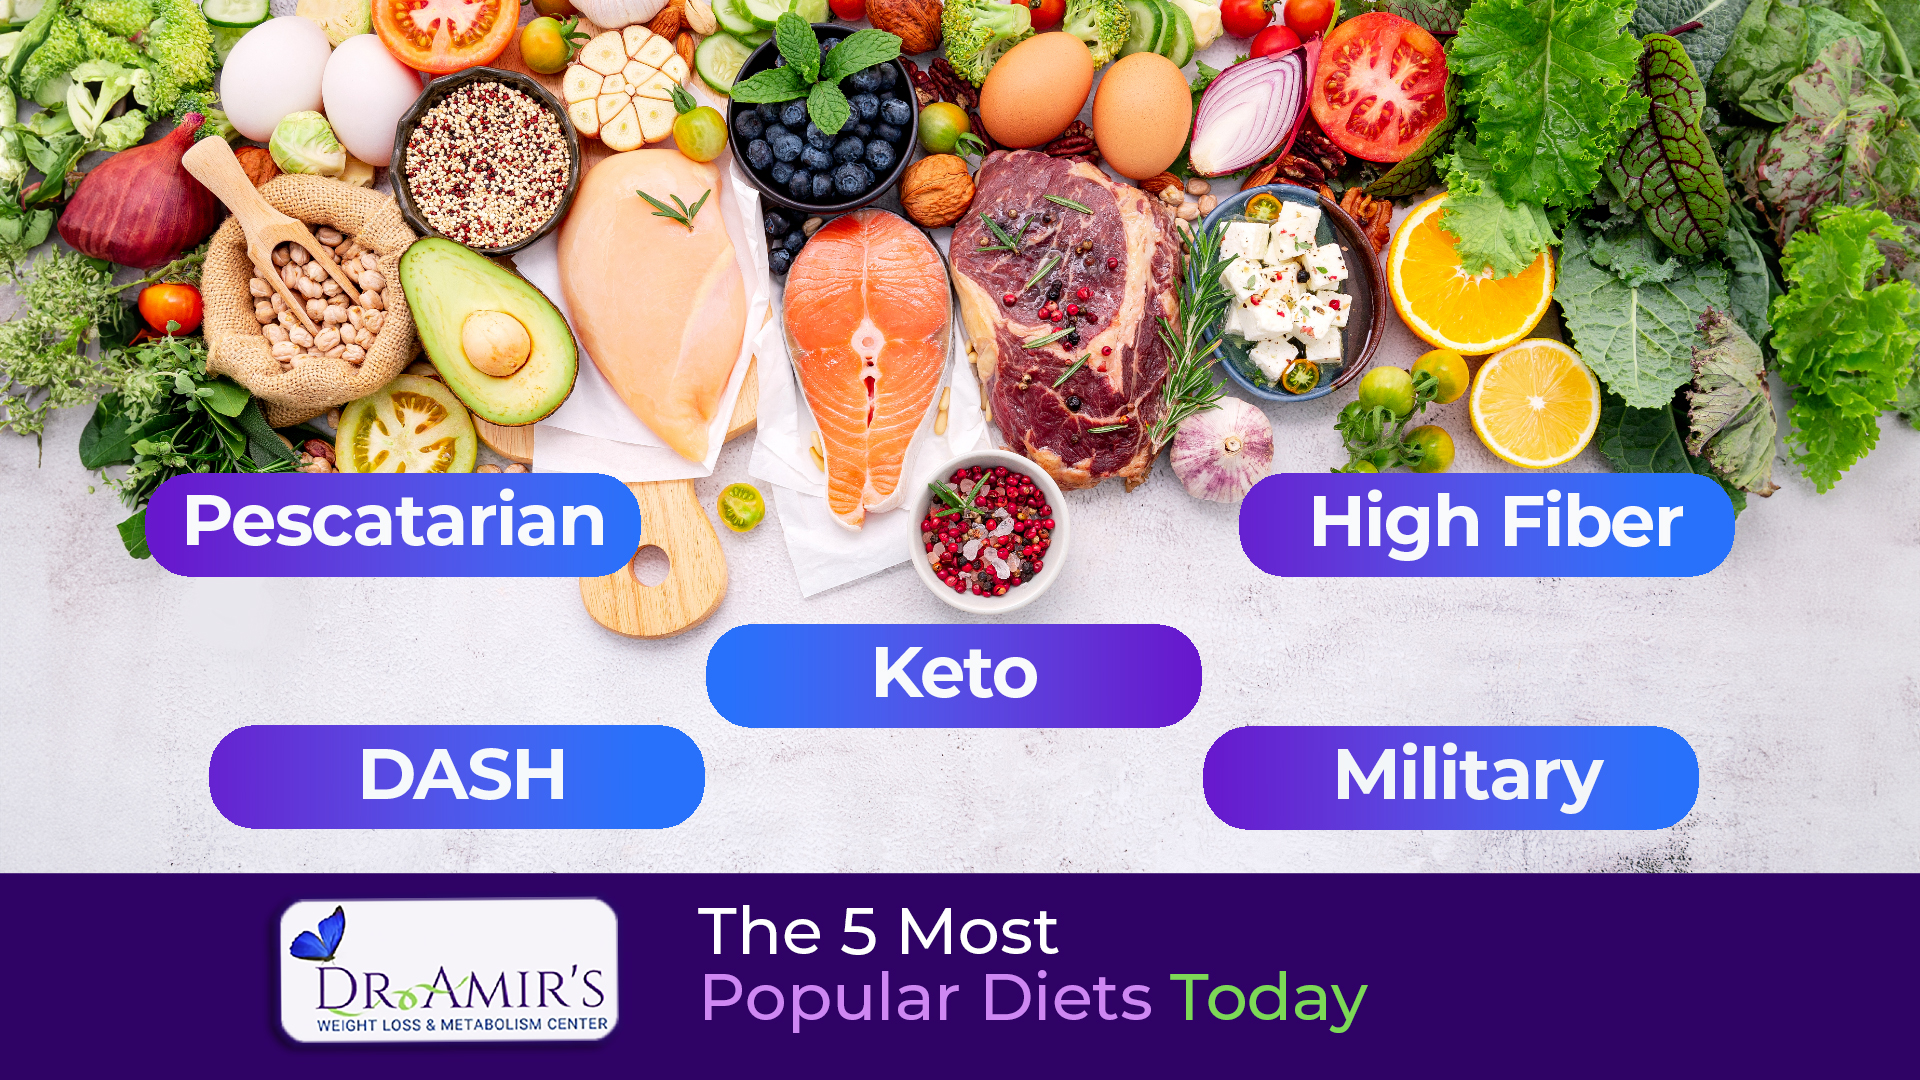 A picture featuring a variety of natural foods such as vegetables, meats, and grains, accompanied by the following five words: Pescatarian, Keto, High Fiber, DASH, and Military, under the title 'The 5 Most Popular Diets Today'.